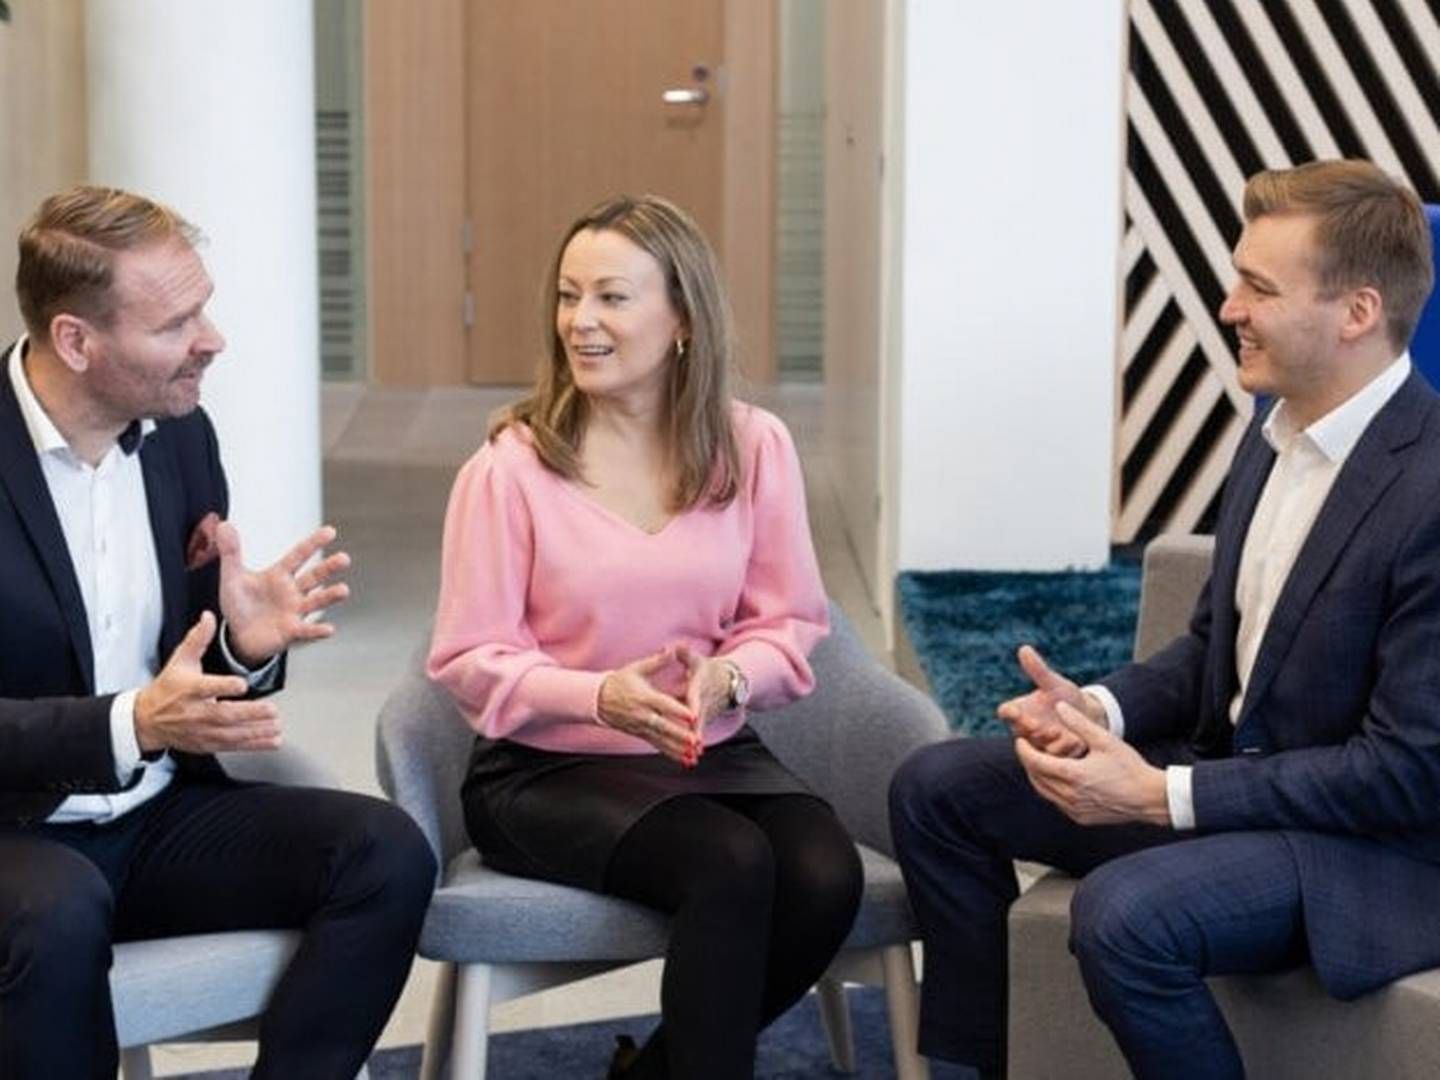 Mike Peltola (right), head of investments and private customers at Handelsbanken Finland, with Nordnet’s country manager for Finland, Suvi Tuppurainen, and Handelsbanken’s head of capital market operations, Finland, Aleksi Lankinen (right). | Photo: Handelsbanken / Nordnet / PR